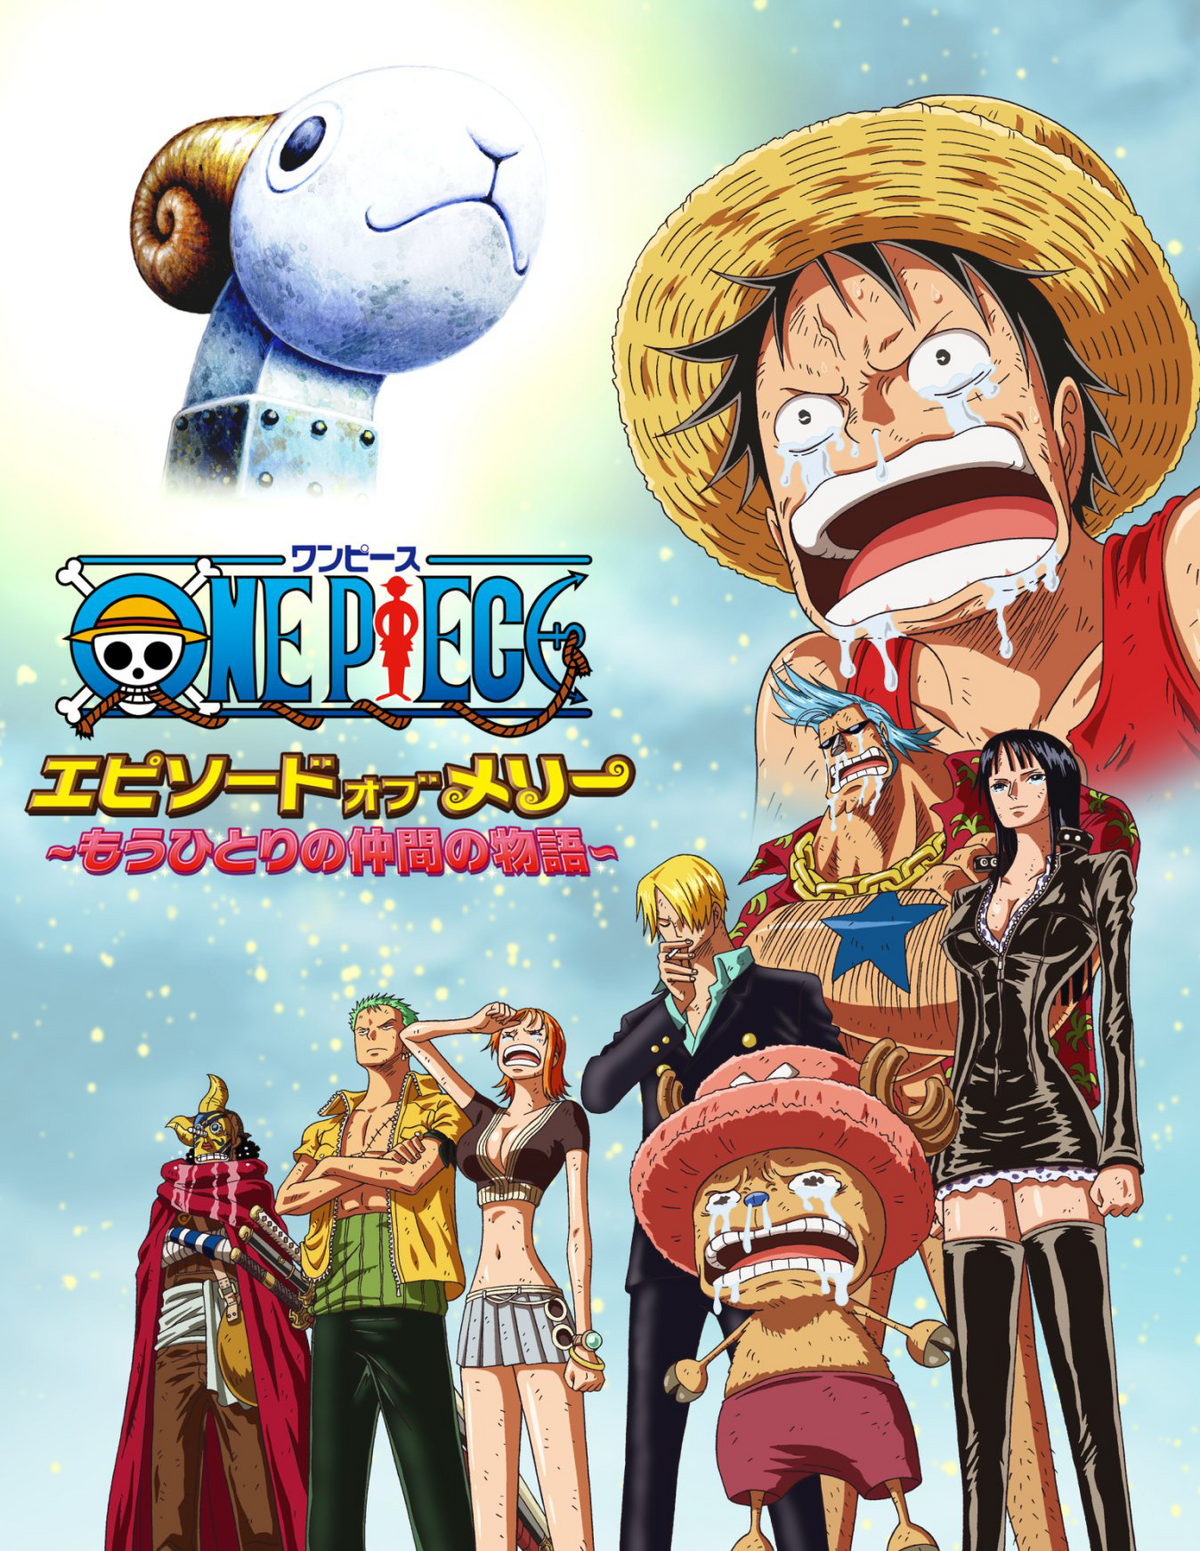 Can someone please explain the remastered episodes of One Piece